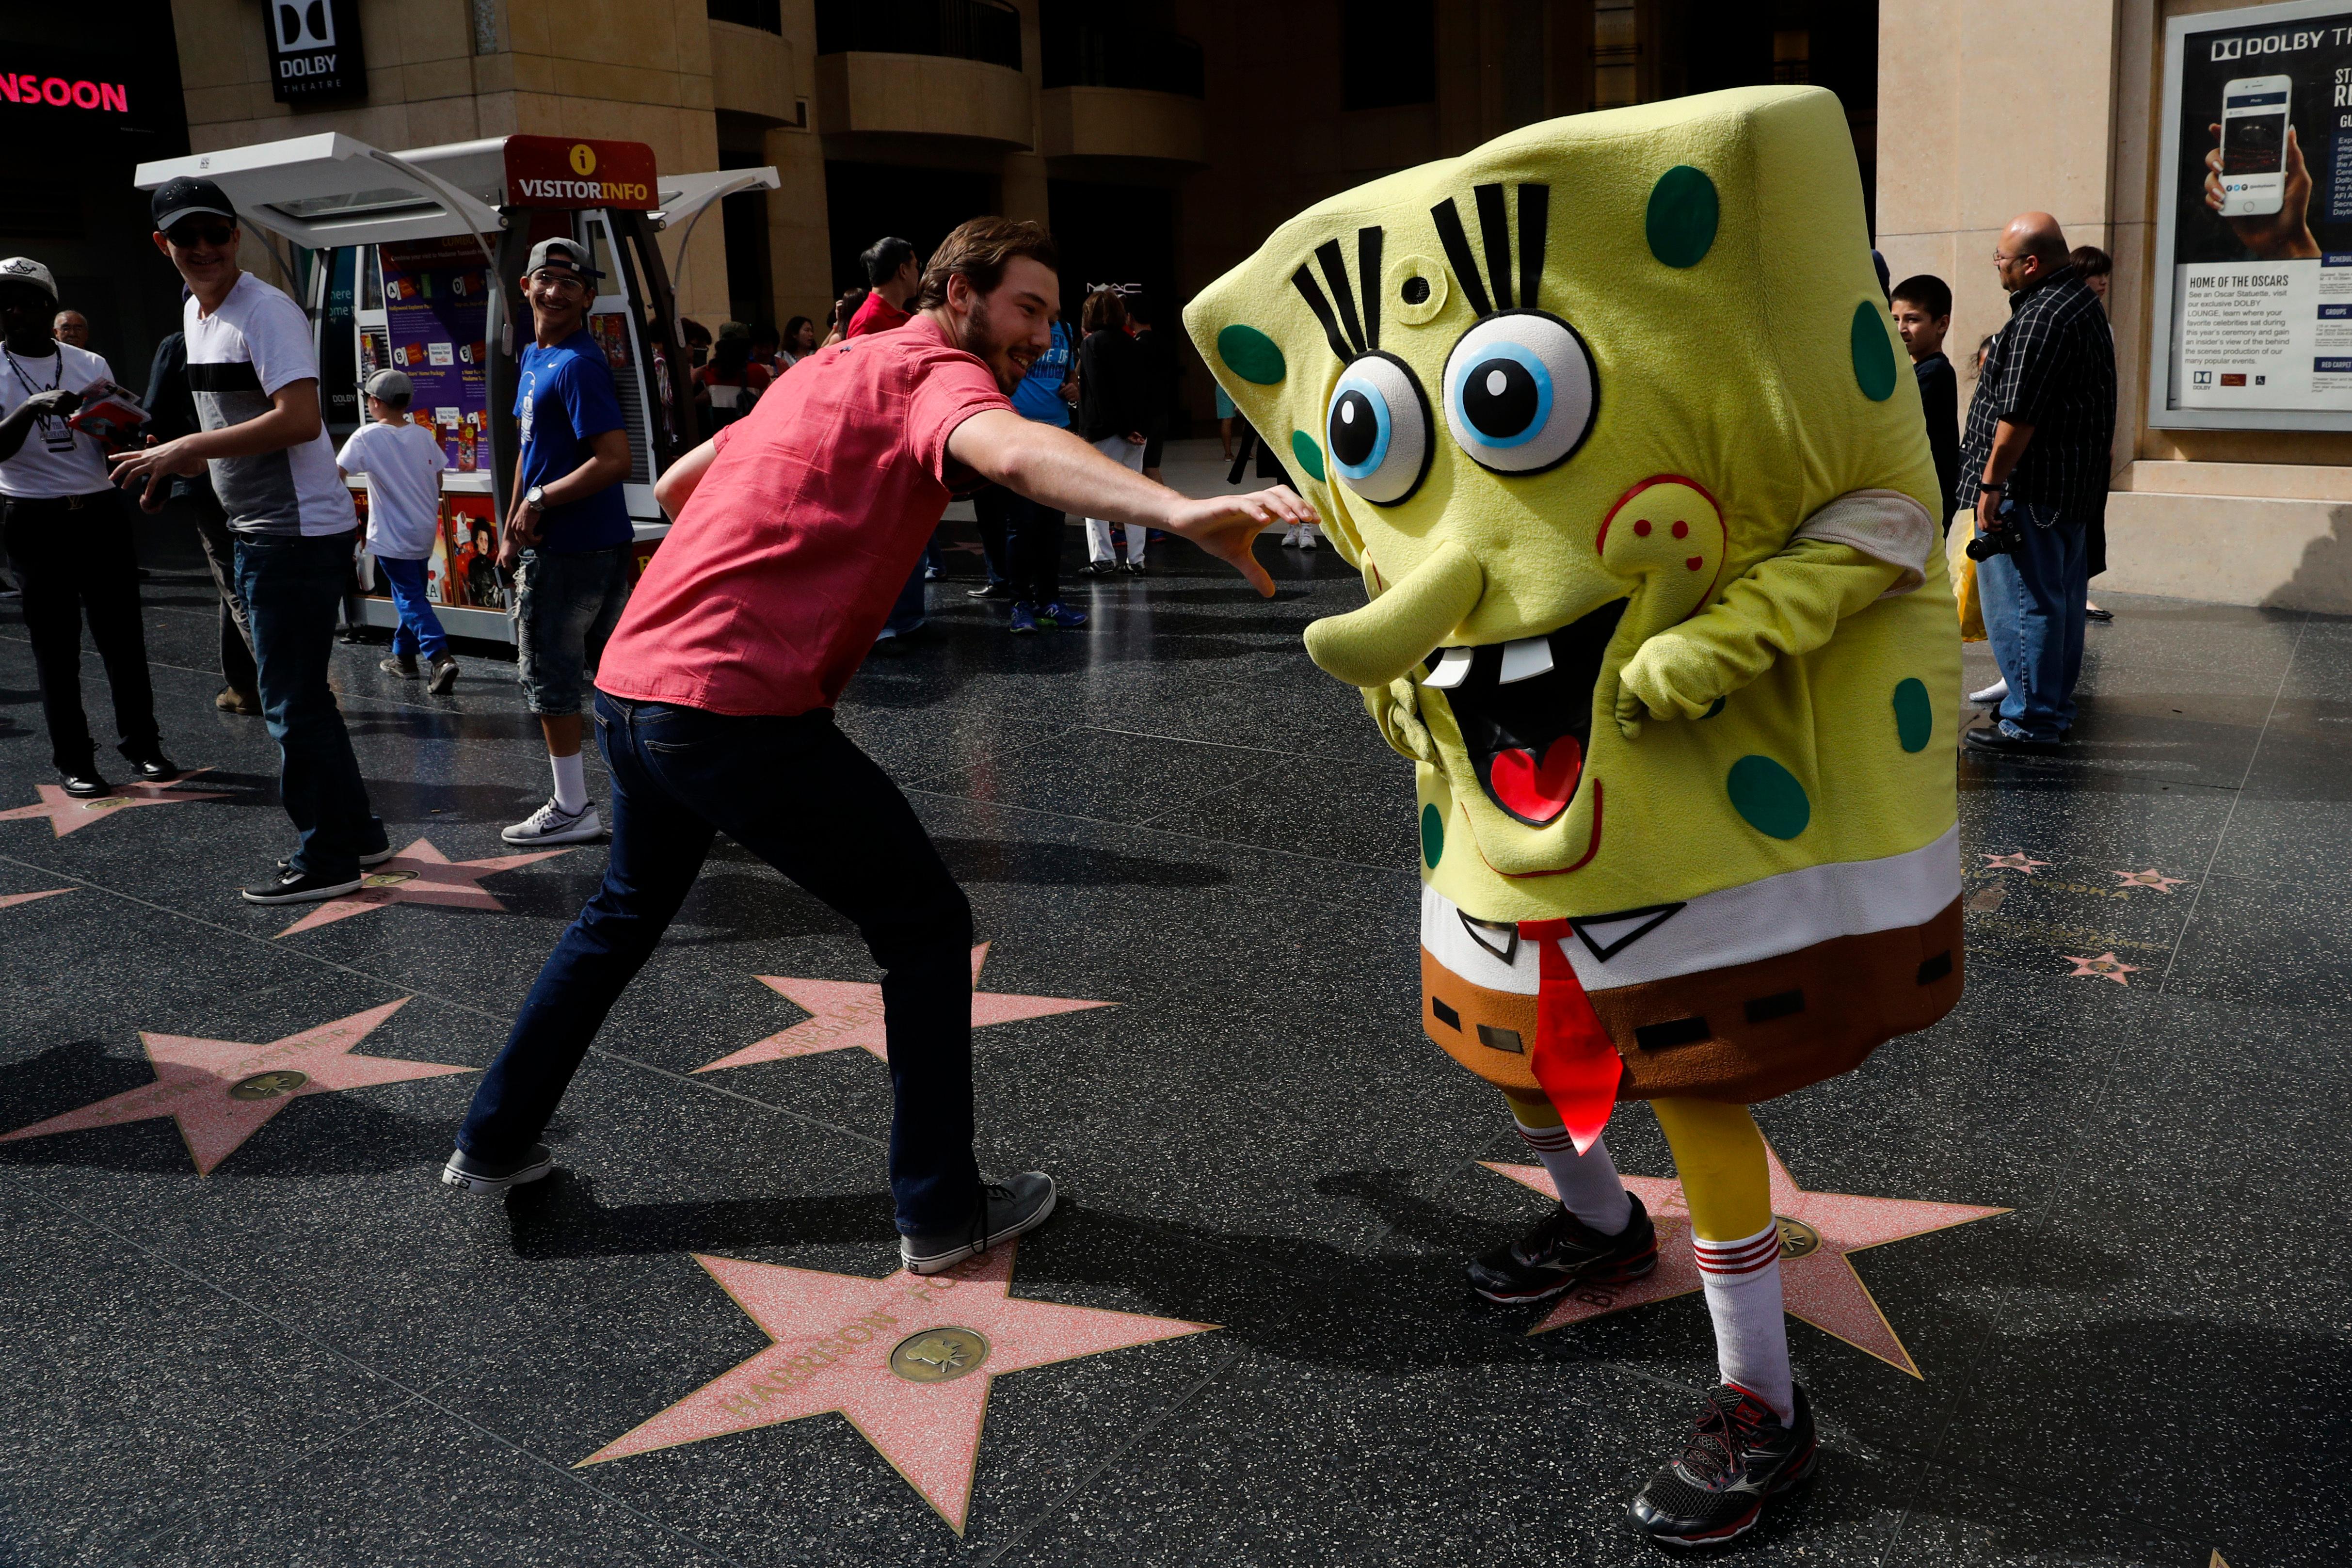 Belnarr Golden, wearing a SpongeBob SquarePants costume, dodges a tourist trying to pull the nose of his costume on Hollywood Boulevard, in Los Angeles. Longtime street performers say the business used to be more lucrative, until the boulevard became overpopulated with costumed characters.  "I crack jokes on them. That's my trick. I make them laugh," said Golden. "If I stand still, I'm not getting paid." Jae C Hong / AP Photo